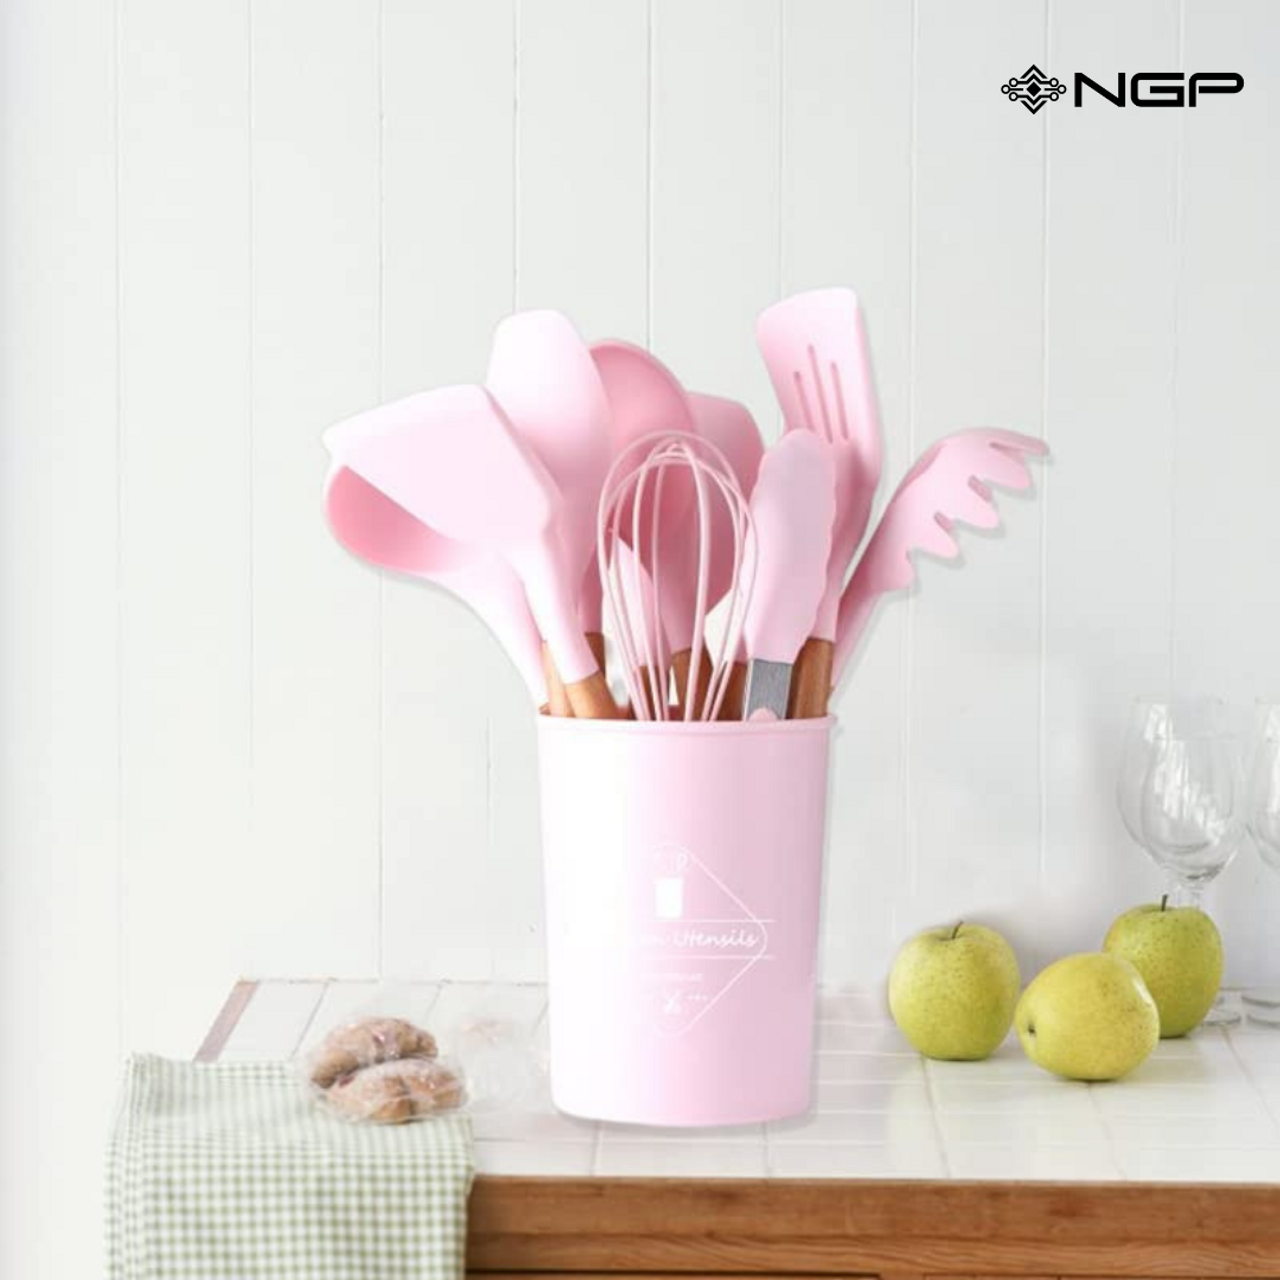 Kitchen Utensil Set - Premium Silicone Cooking Utensils - Nonstick Kitchen  Utensils - Kitchen Gadgets Cookware Set - Best Kitchen Tool Set for Baking  Cooking & Mixing,Pink Duck Tongue Scraper 